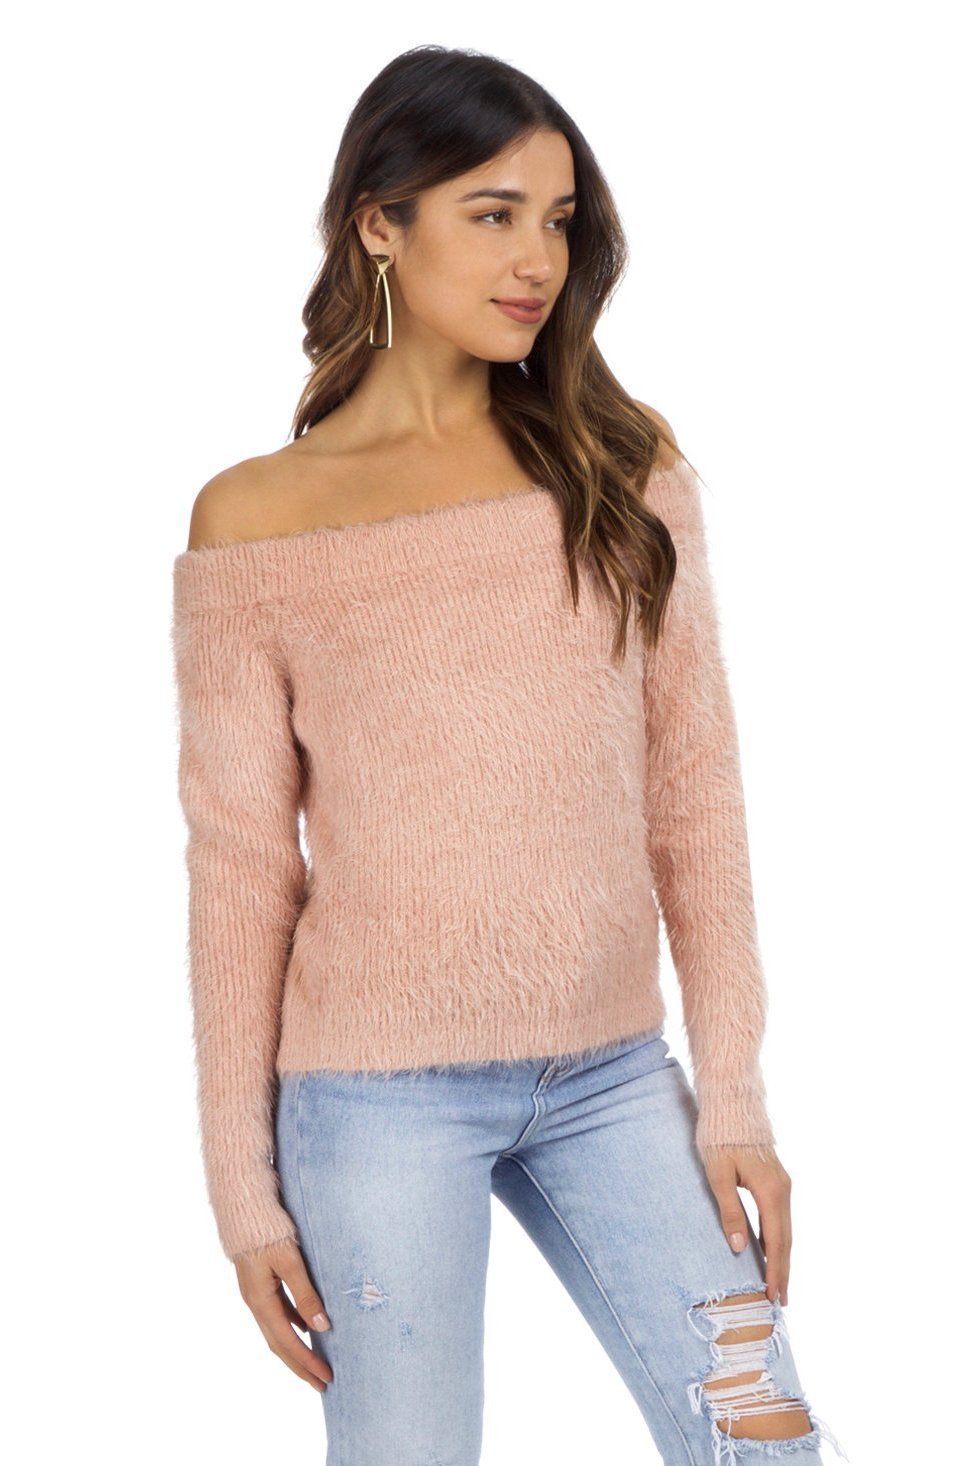 Woman wearing a sweater rental from MINKPINK called Florentine Off Shoulder Sweater